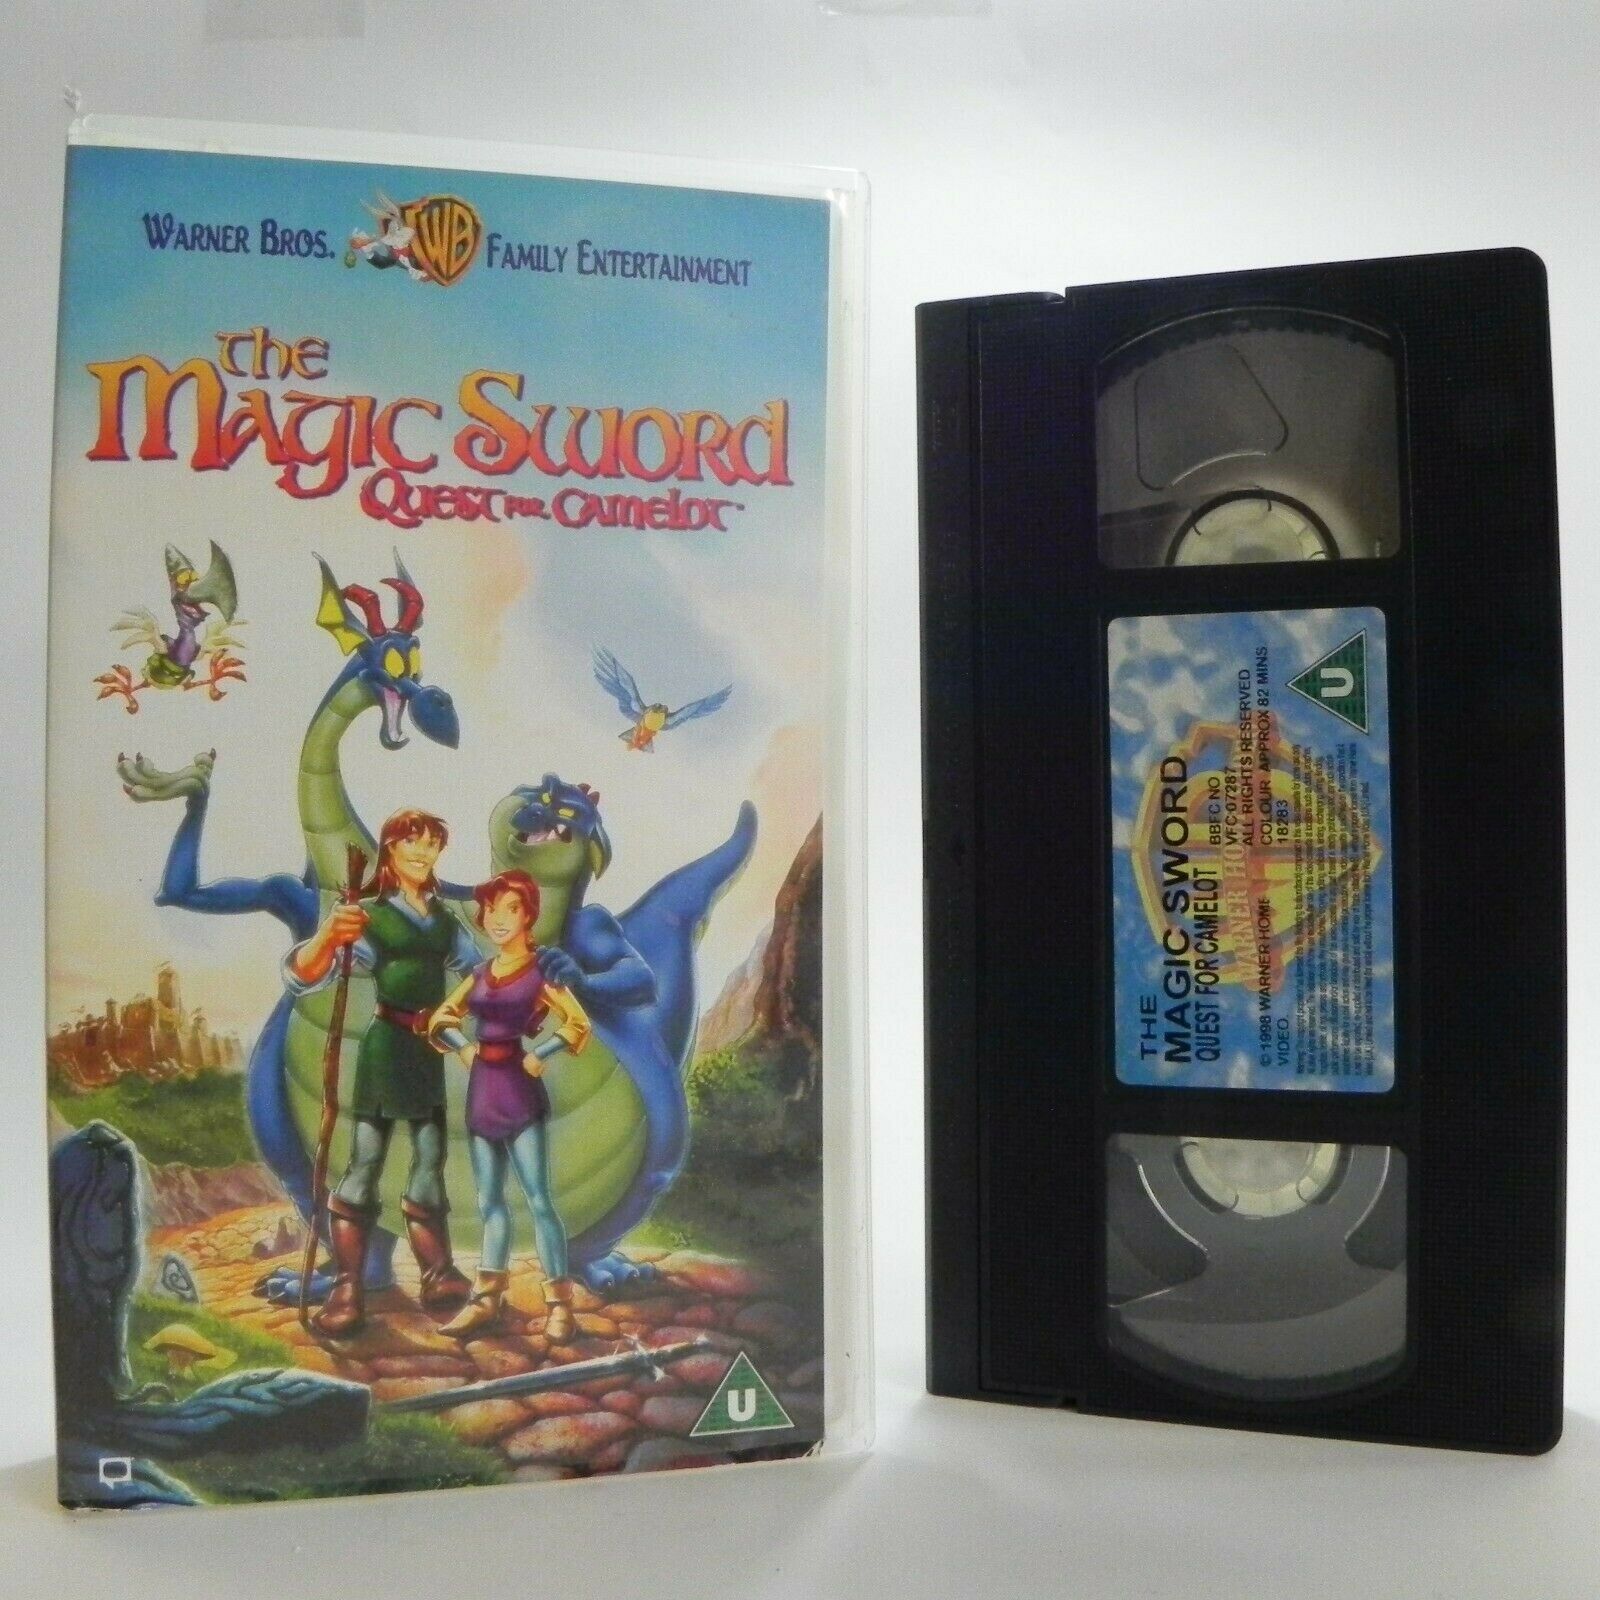 The Magic Sword: Quest For Camelot - Warner Family - Animated - Adventure - VHS-